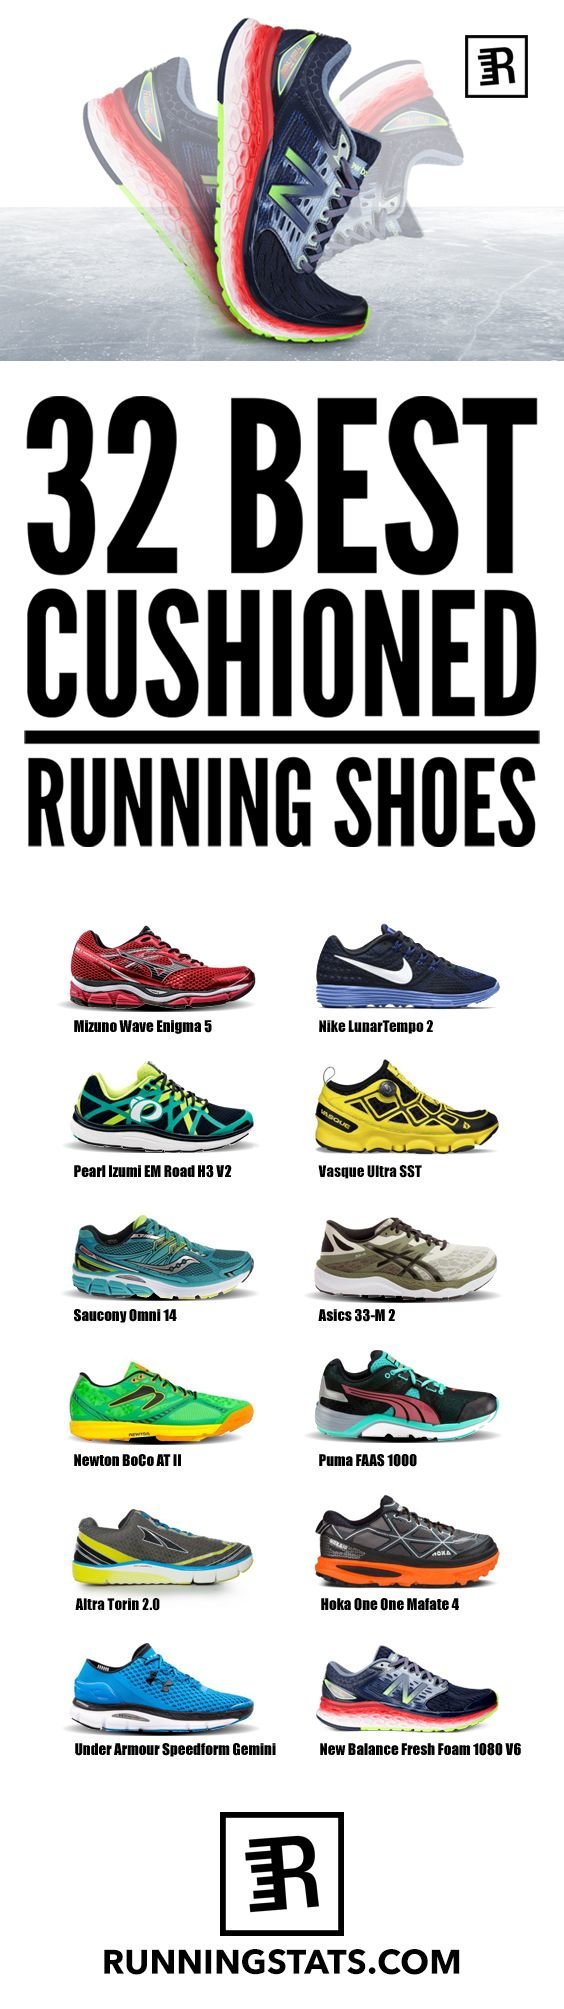 cushioned running shoes